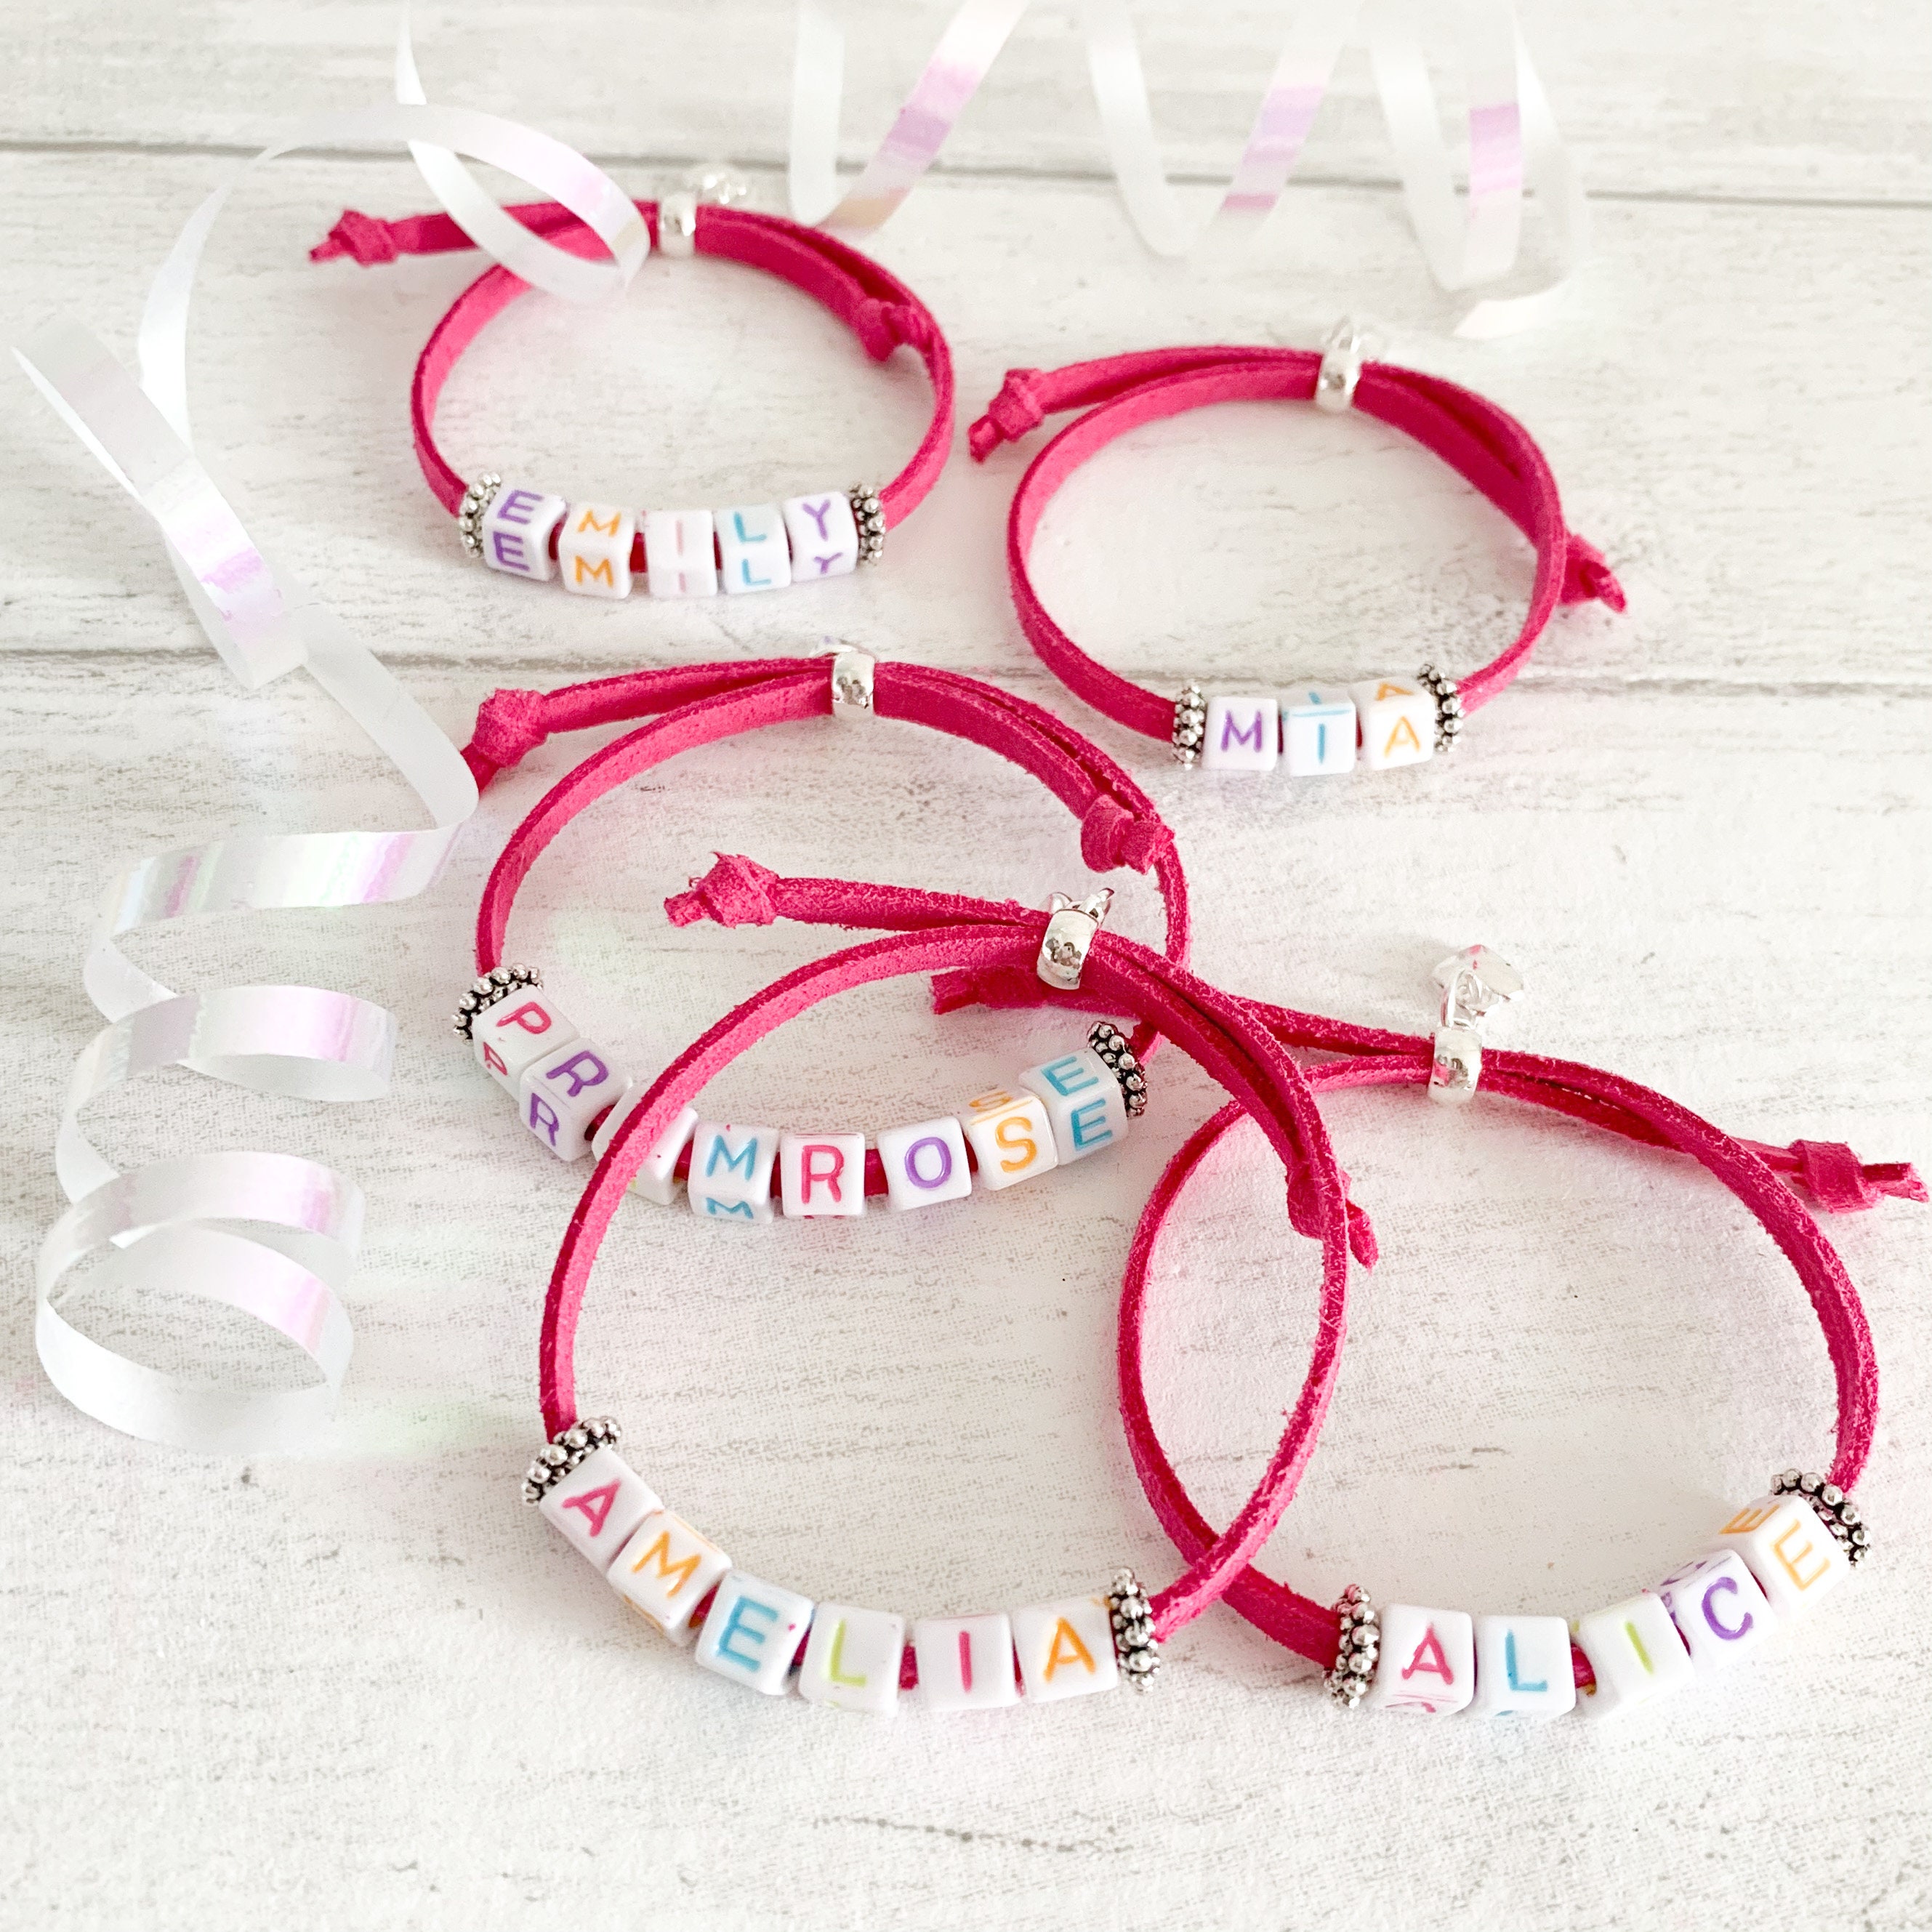 Personalised Name Friendship Bracelets Party Bag Favours - Kids Party Bag Fillers, Kids Jewellery, Personalised Jewellery, Birthday Gift